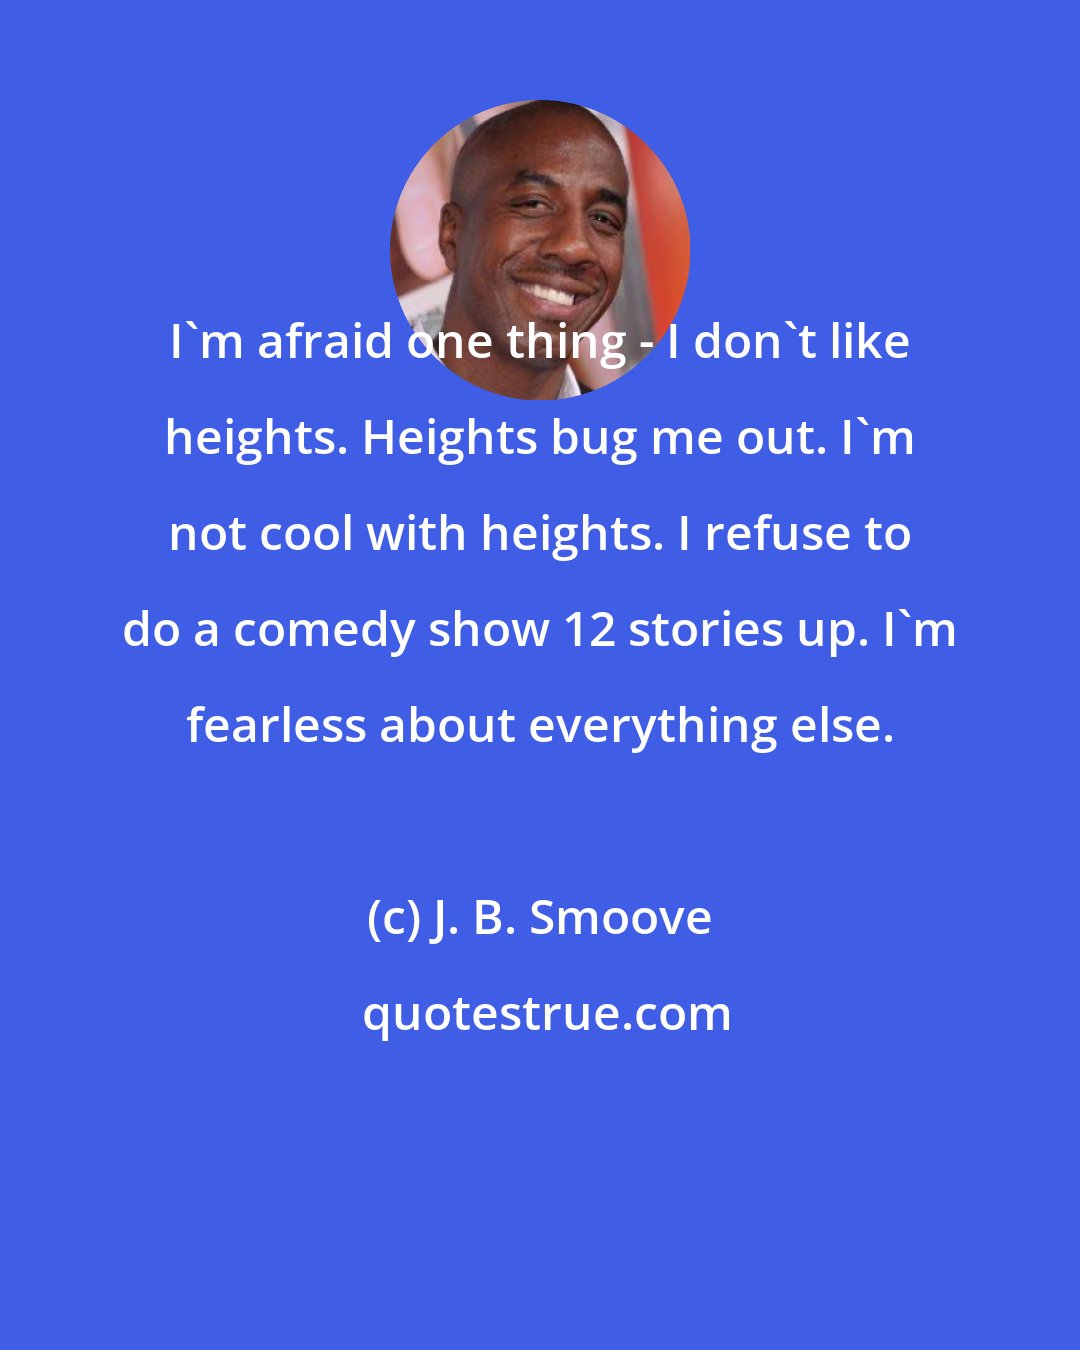 J. B. Smoove: I'm afraid one thing - I don't like heights. Heights bug me out. I'm not cool with heights. I refuse to do a comedy show 12 stories up. I'm fearless about everything else.